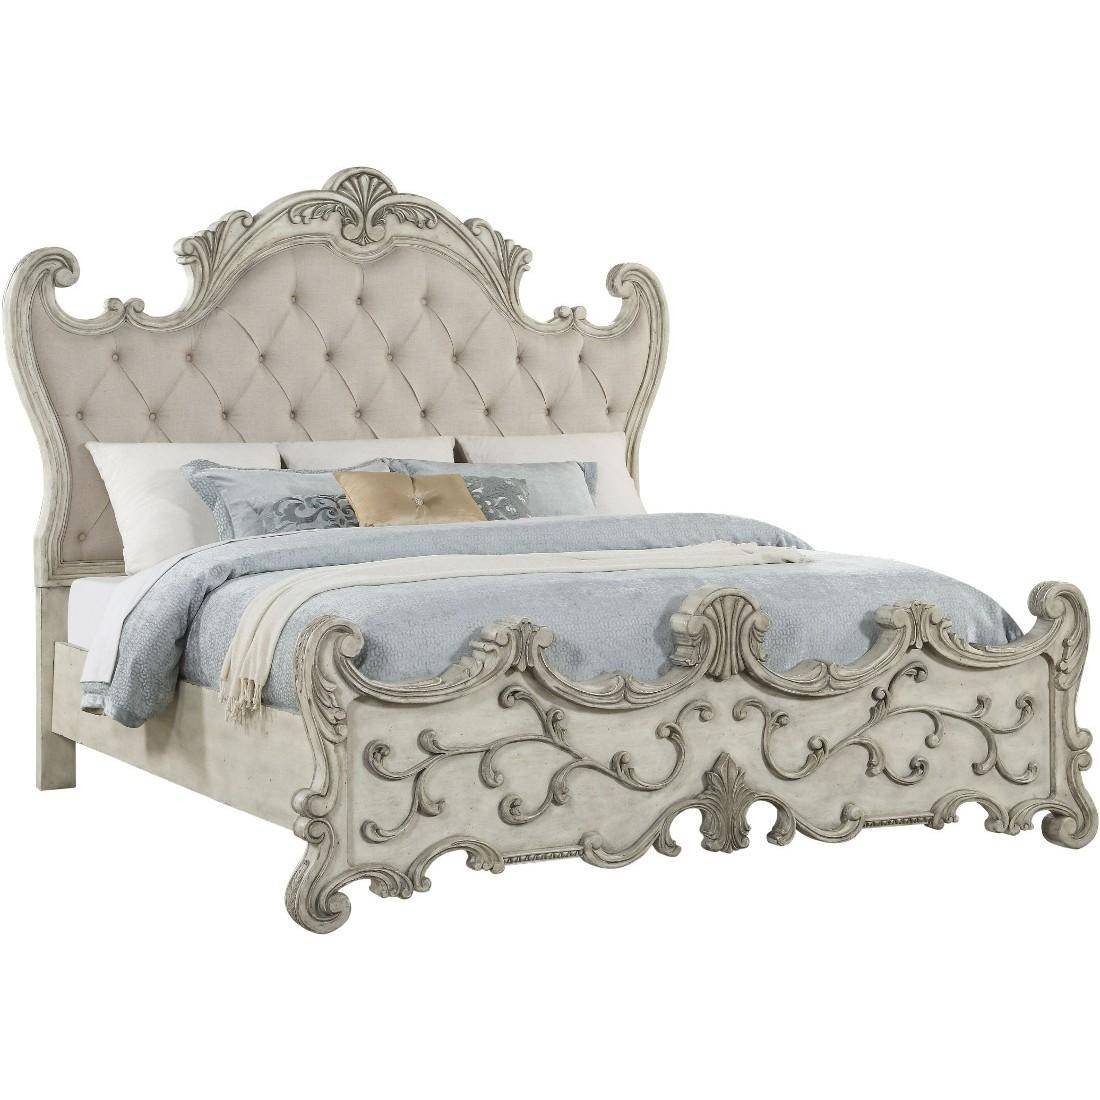 White Tufted Bedroom Set Inspirational Luxury King Bedroom Set 5p W Chest Antique White Fabric